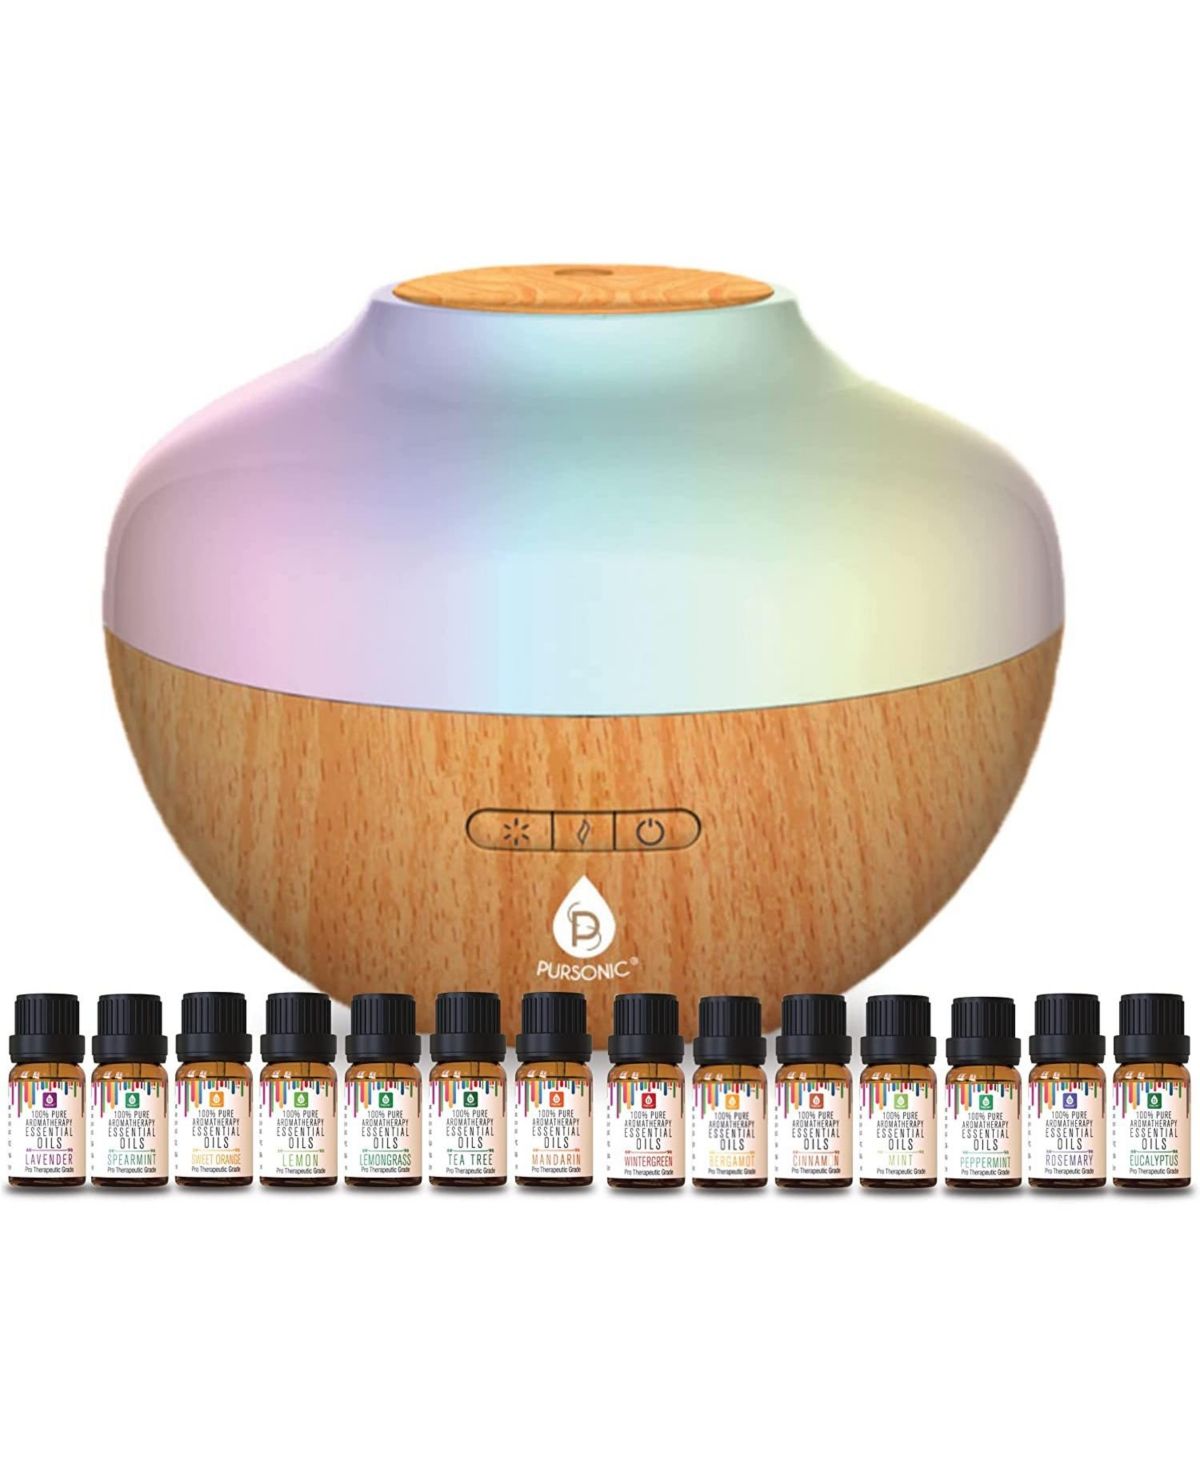 Pursonic Aromatherapy Diffuser & Essential Oil Set-Ultrasonic Top 14 Oils-300ml with 2 Mist Settings | Macys (US)